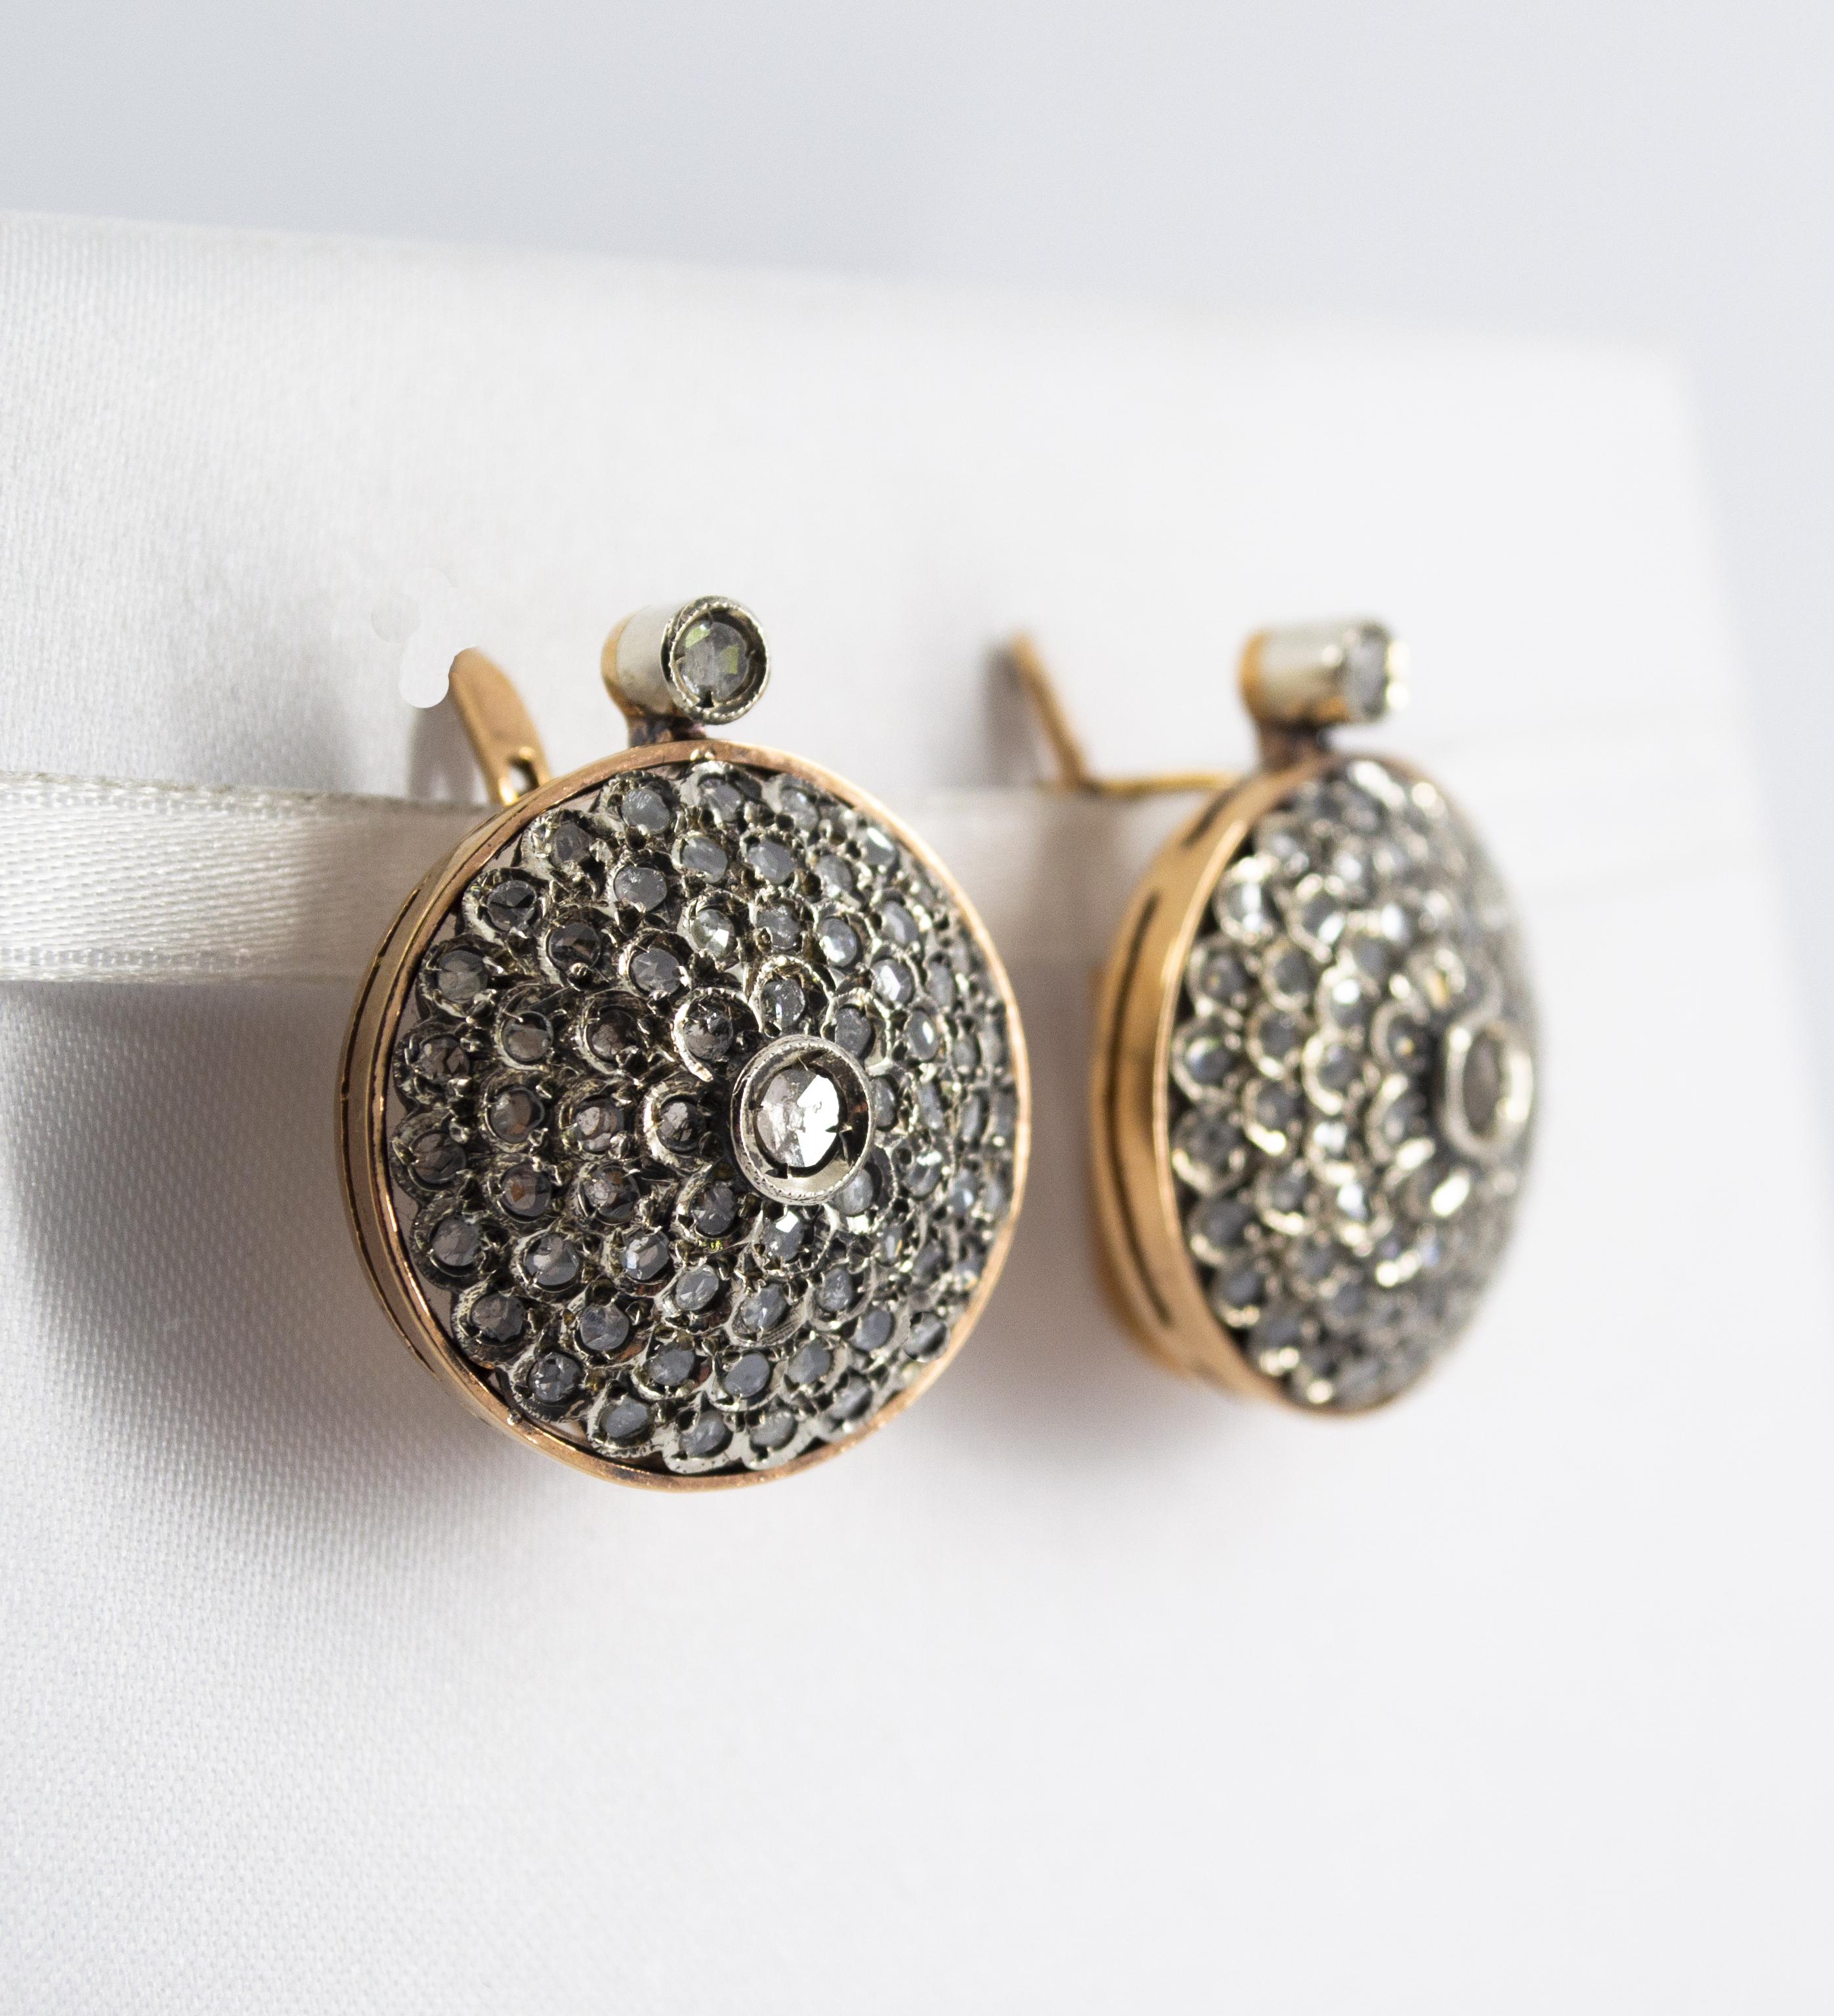 These Earrings are made of 9K Yellow Gold and Sterling Silver.
These Earrings have 2.00 Carats of White Rose Cut Diamonds.

All our Earrings have pins for pierced ears but we can change the closure and make any of our Earrings suitable even for